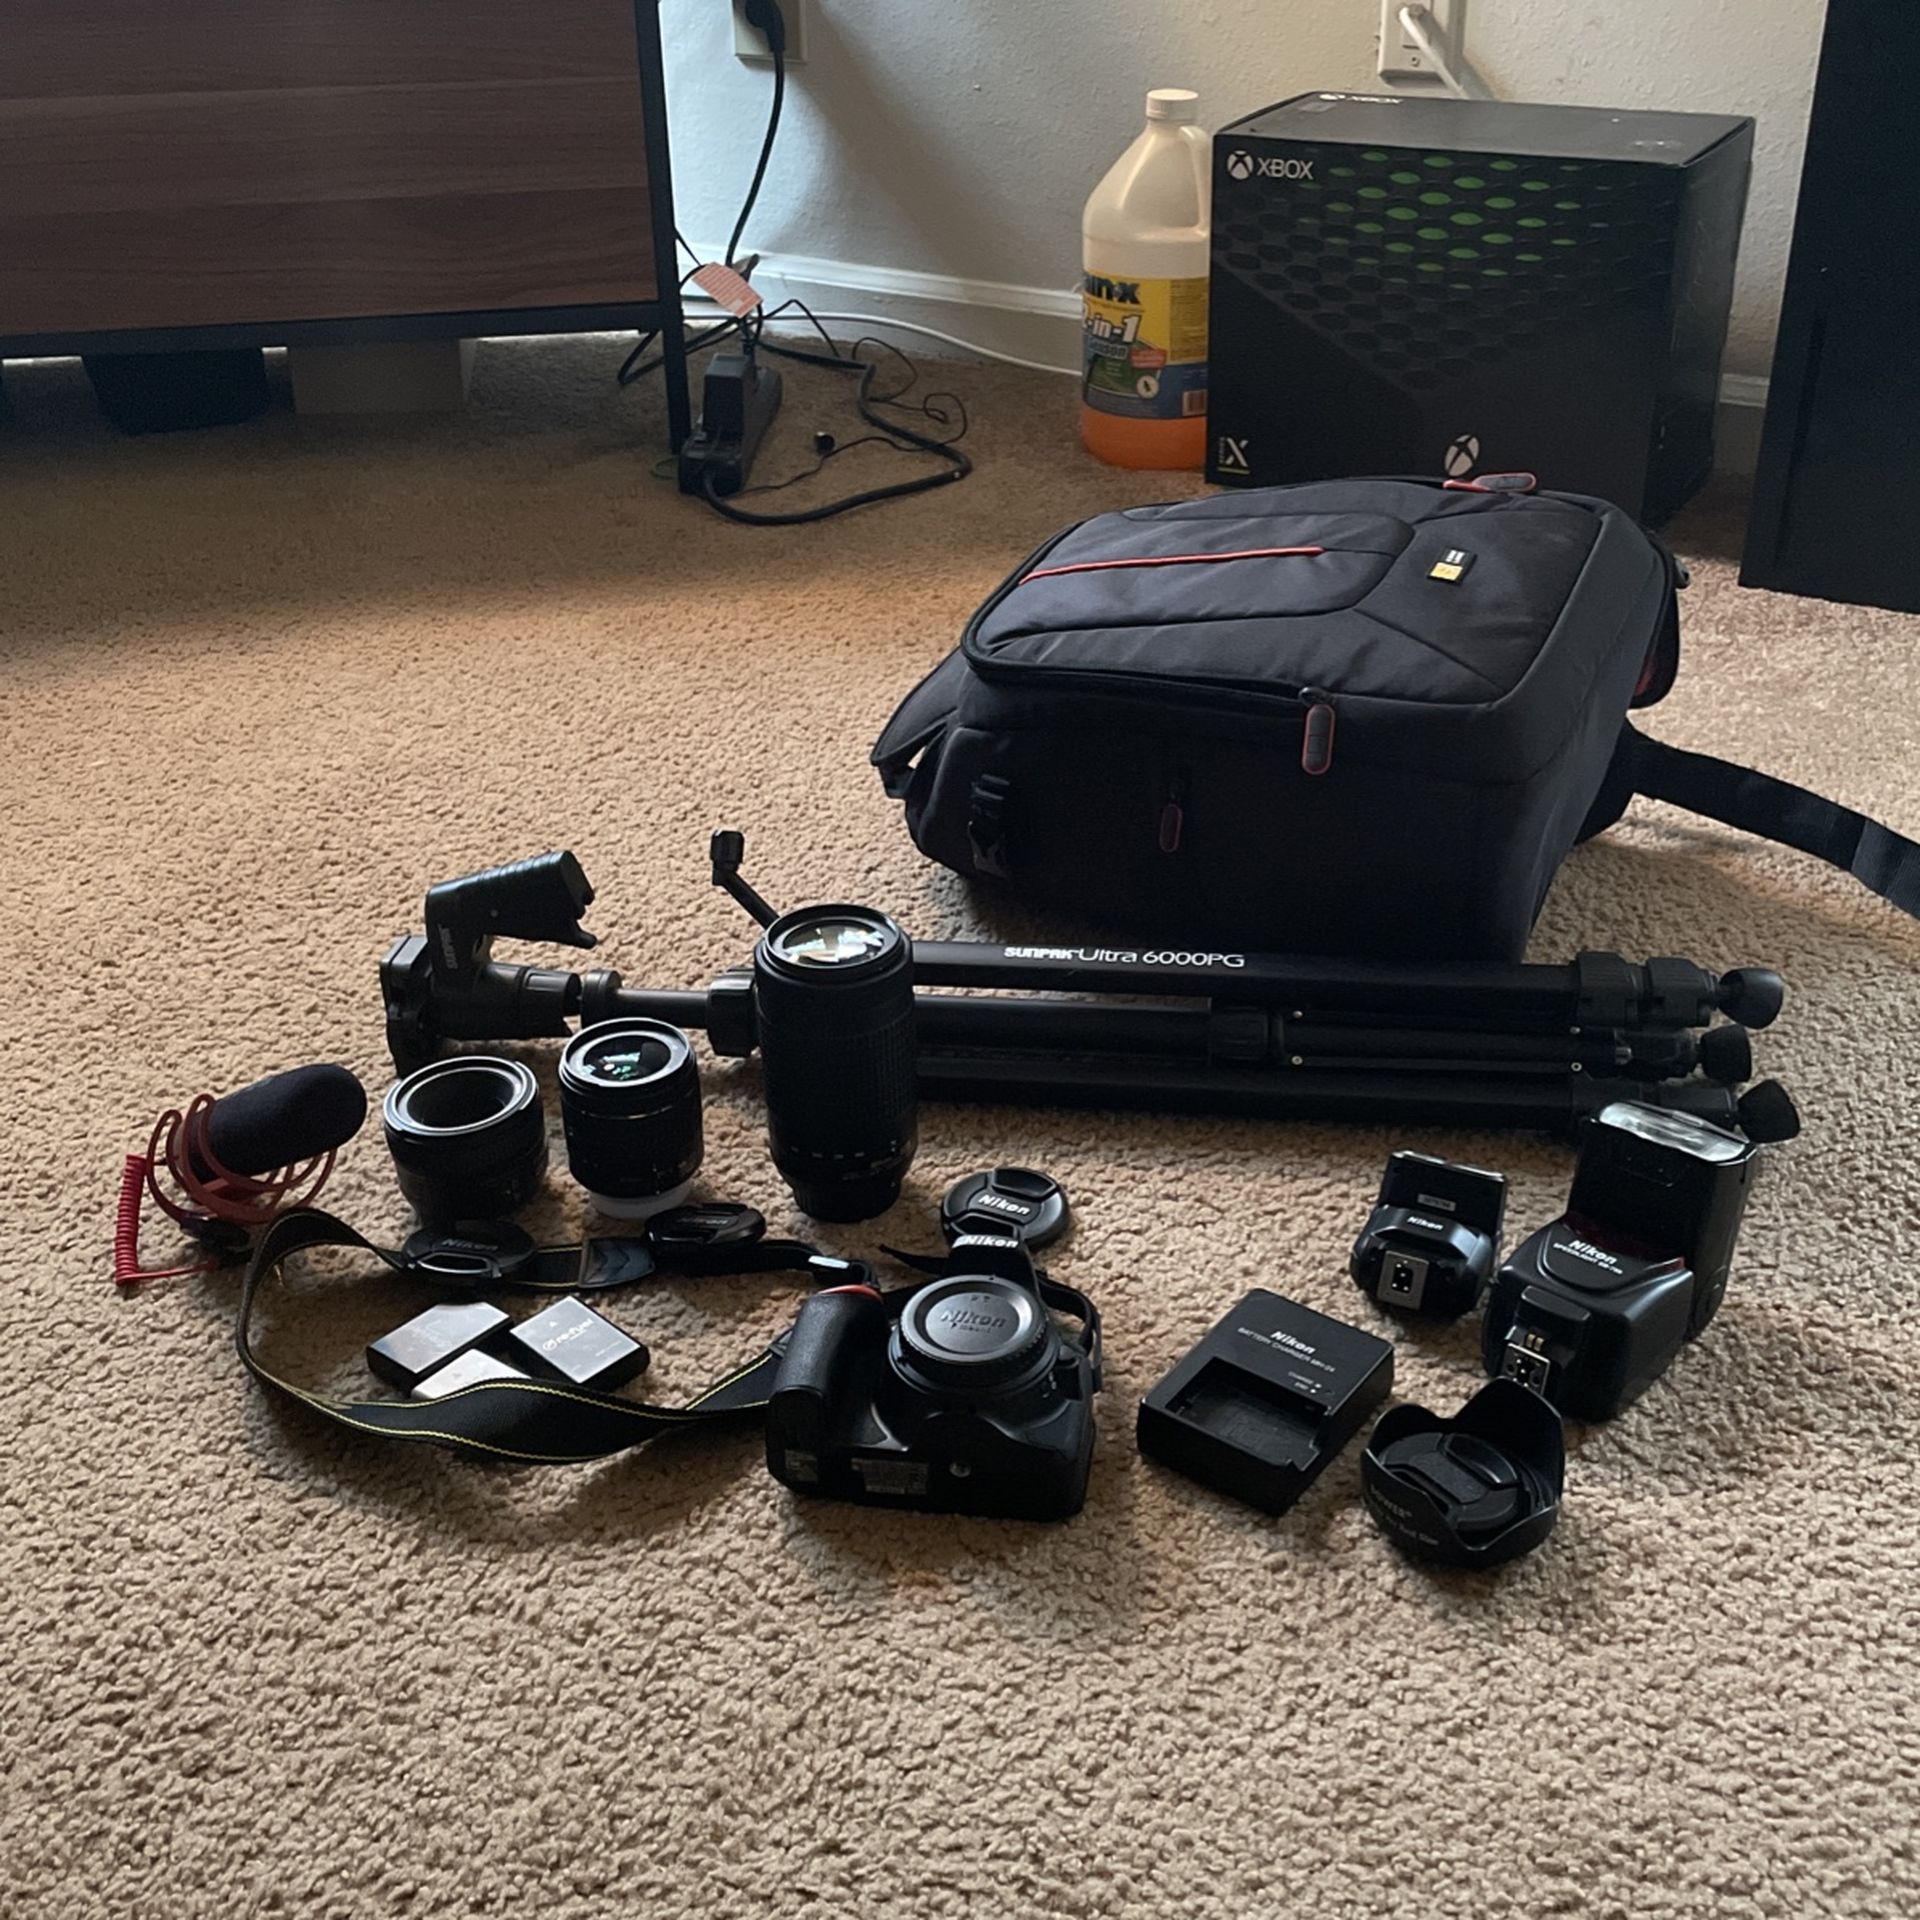 Nikon D5600 And Equipment Used